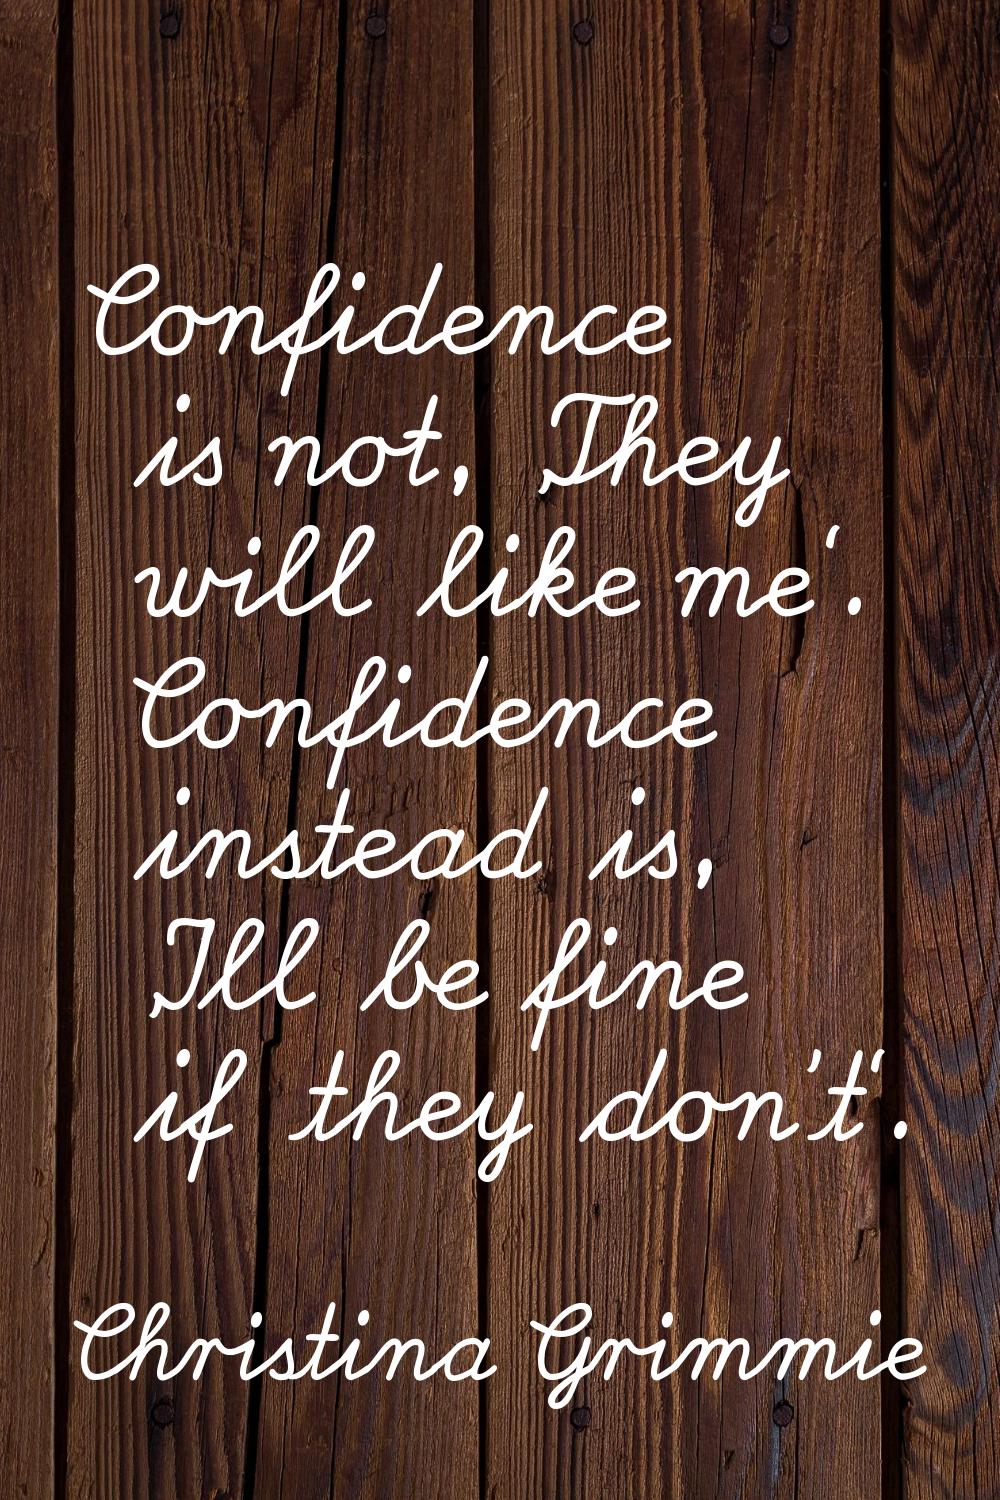 Confidence is not, 'They will like me'. Confidence instead is, 'I'll be fine if they don't'.